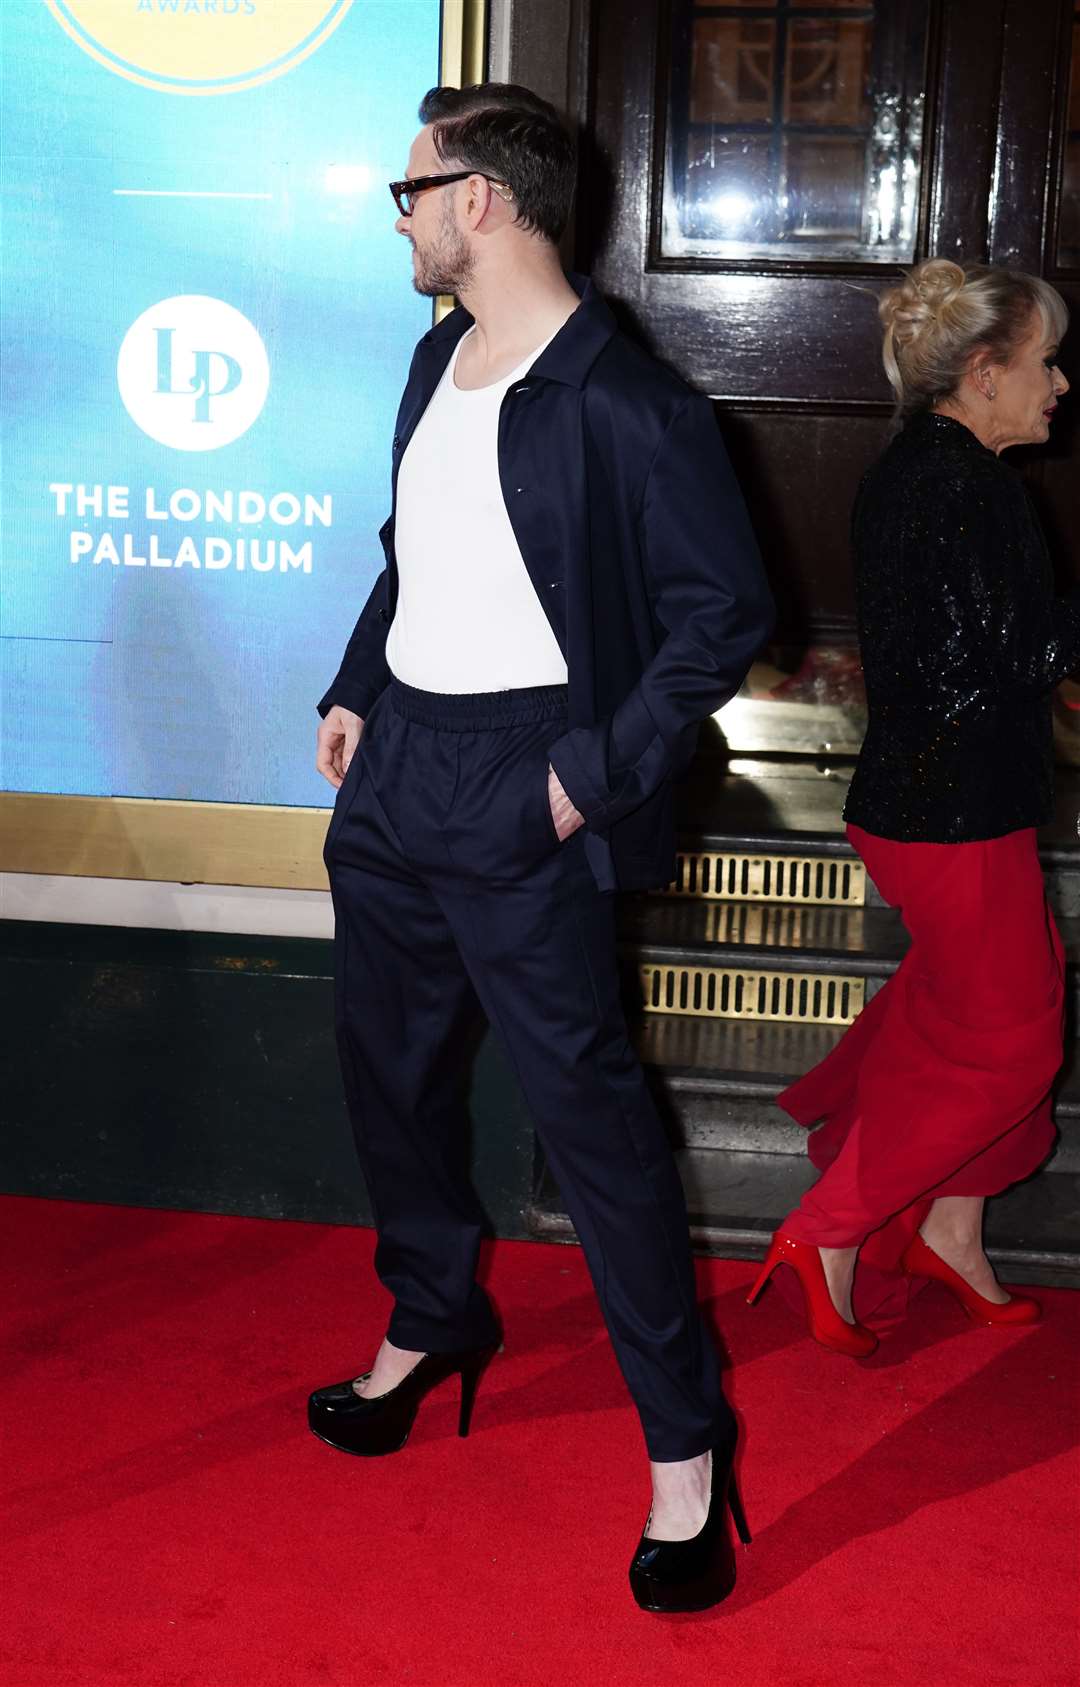 Kevin Clifton wearing high heels (Ian West/PA)